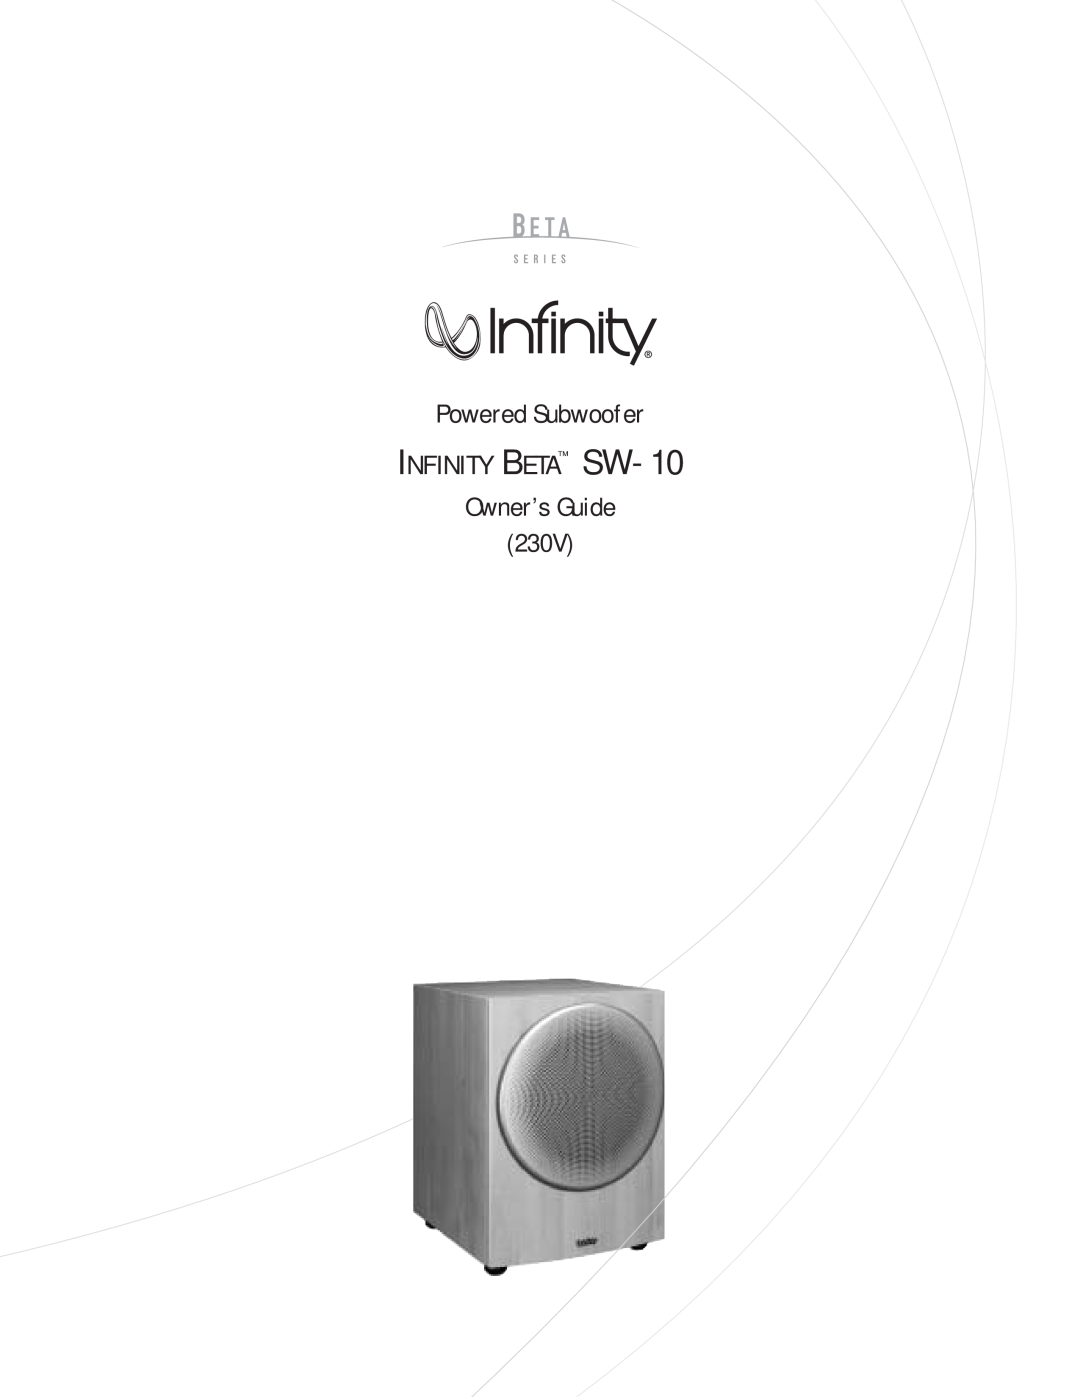 Infinity manual INFINITY BETA SW-10, Powered Subwoofer, Owner’s Guide 